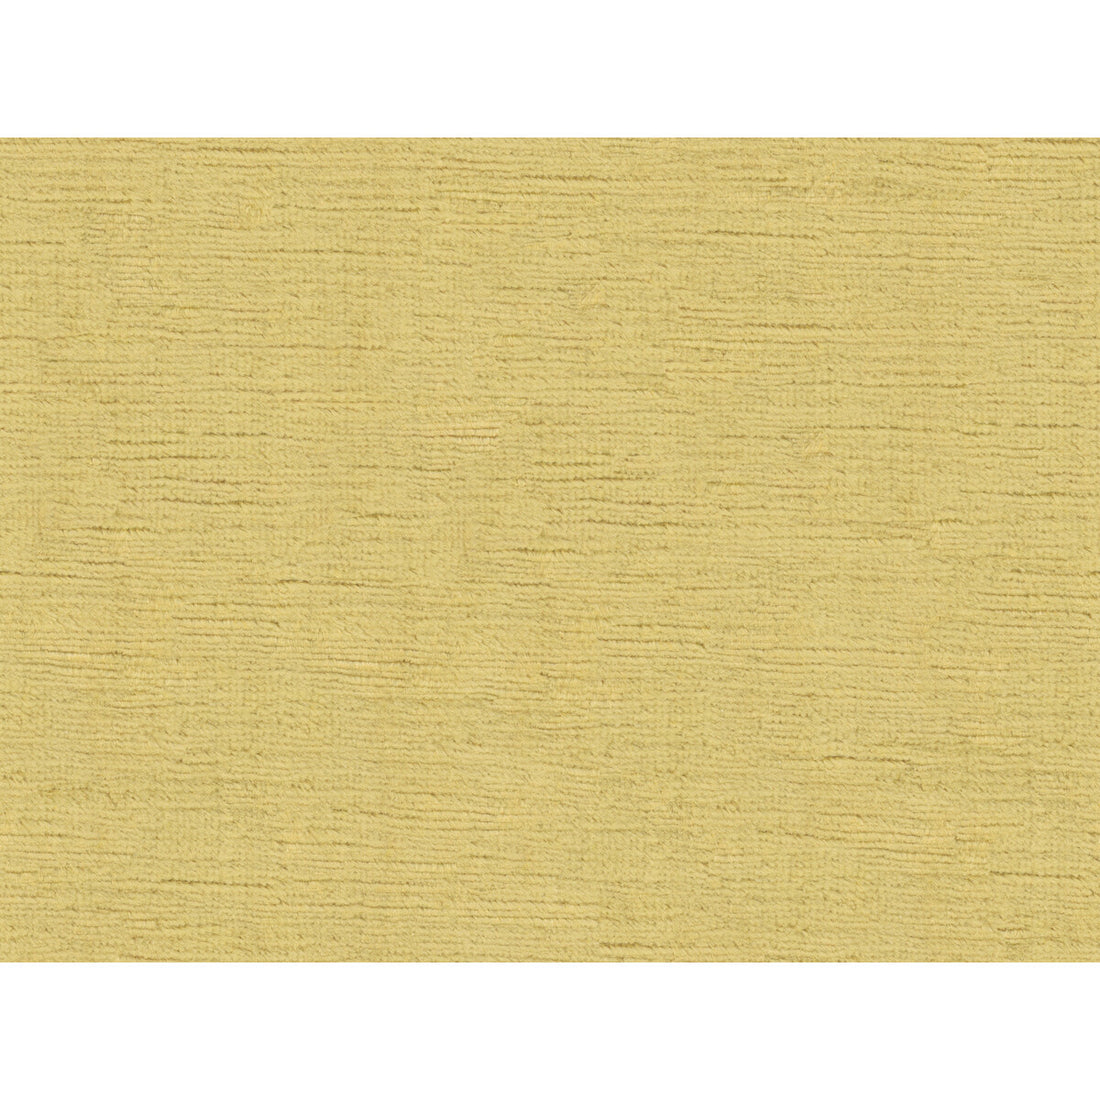 Fulham Linen V fabric in corn color - pattern 2016133.114.0 - by Lee Jofa